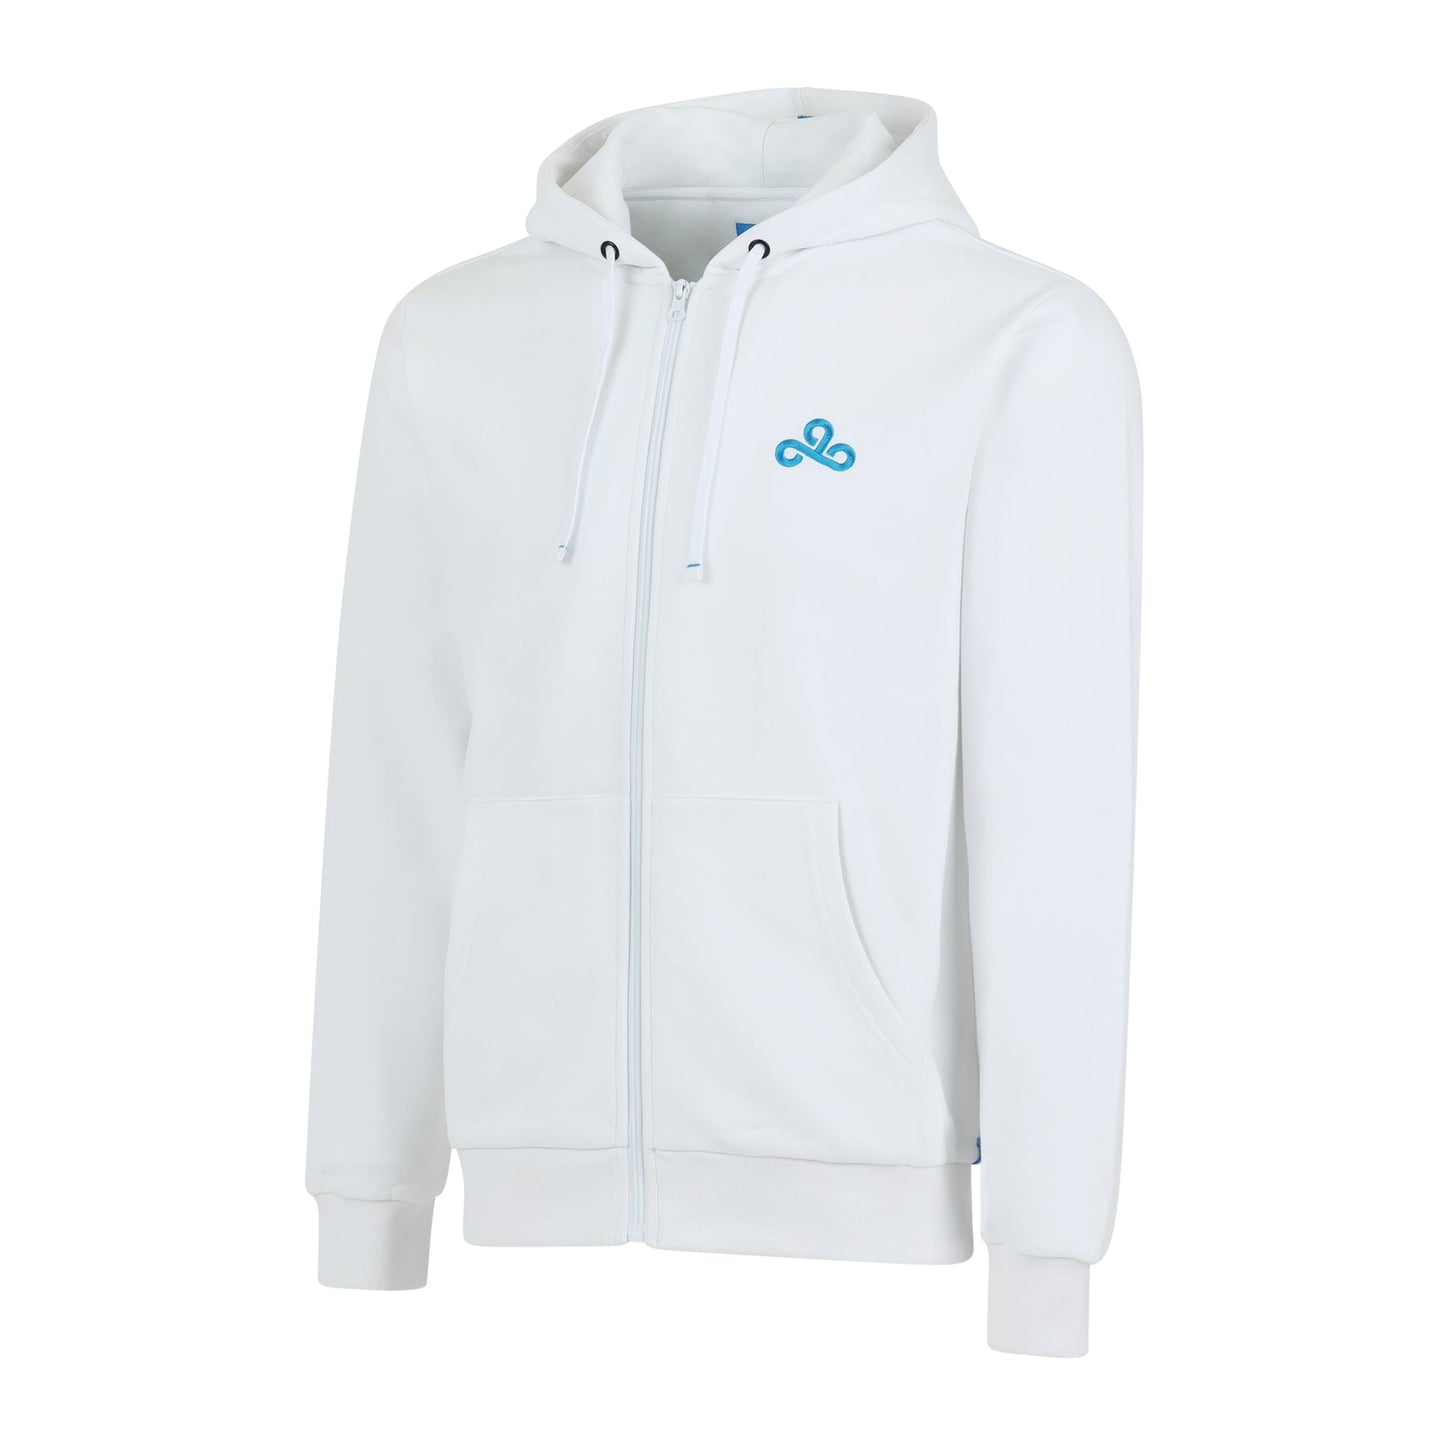 Cloud9 Core Collection Hoodie - White